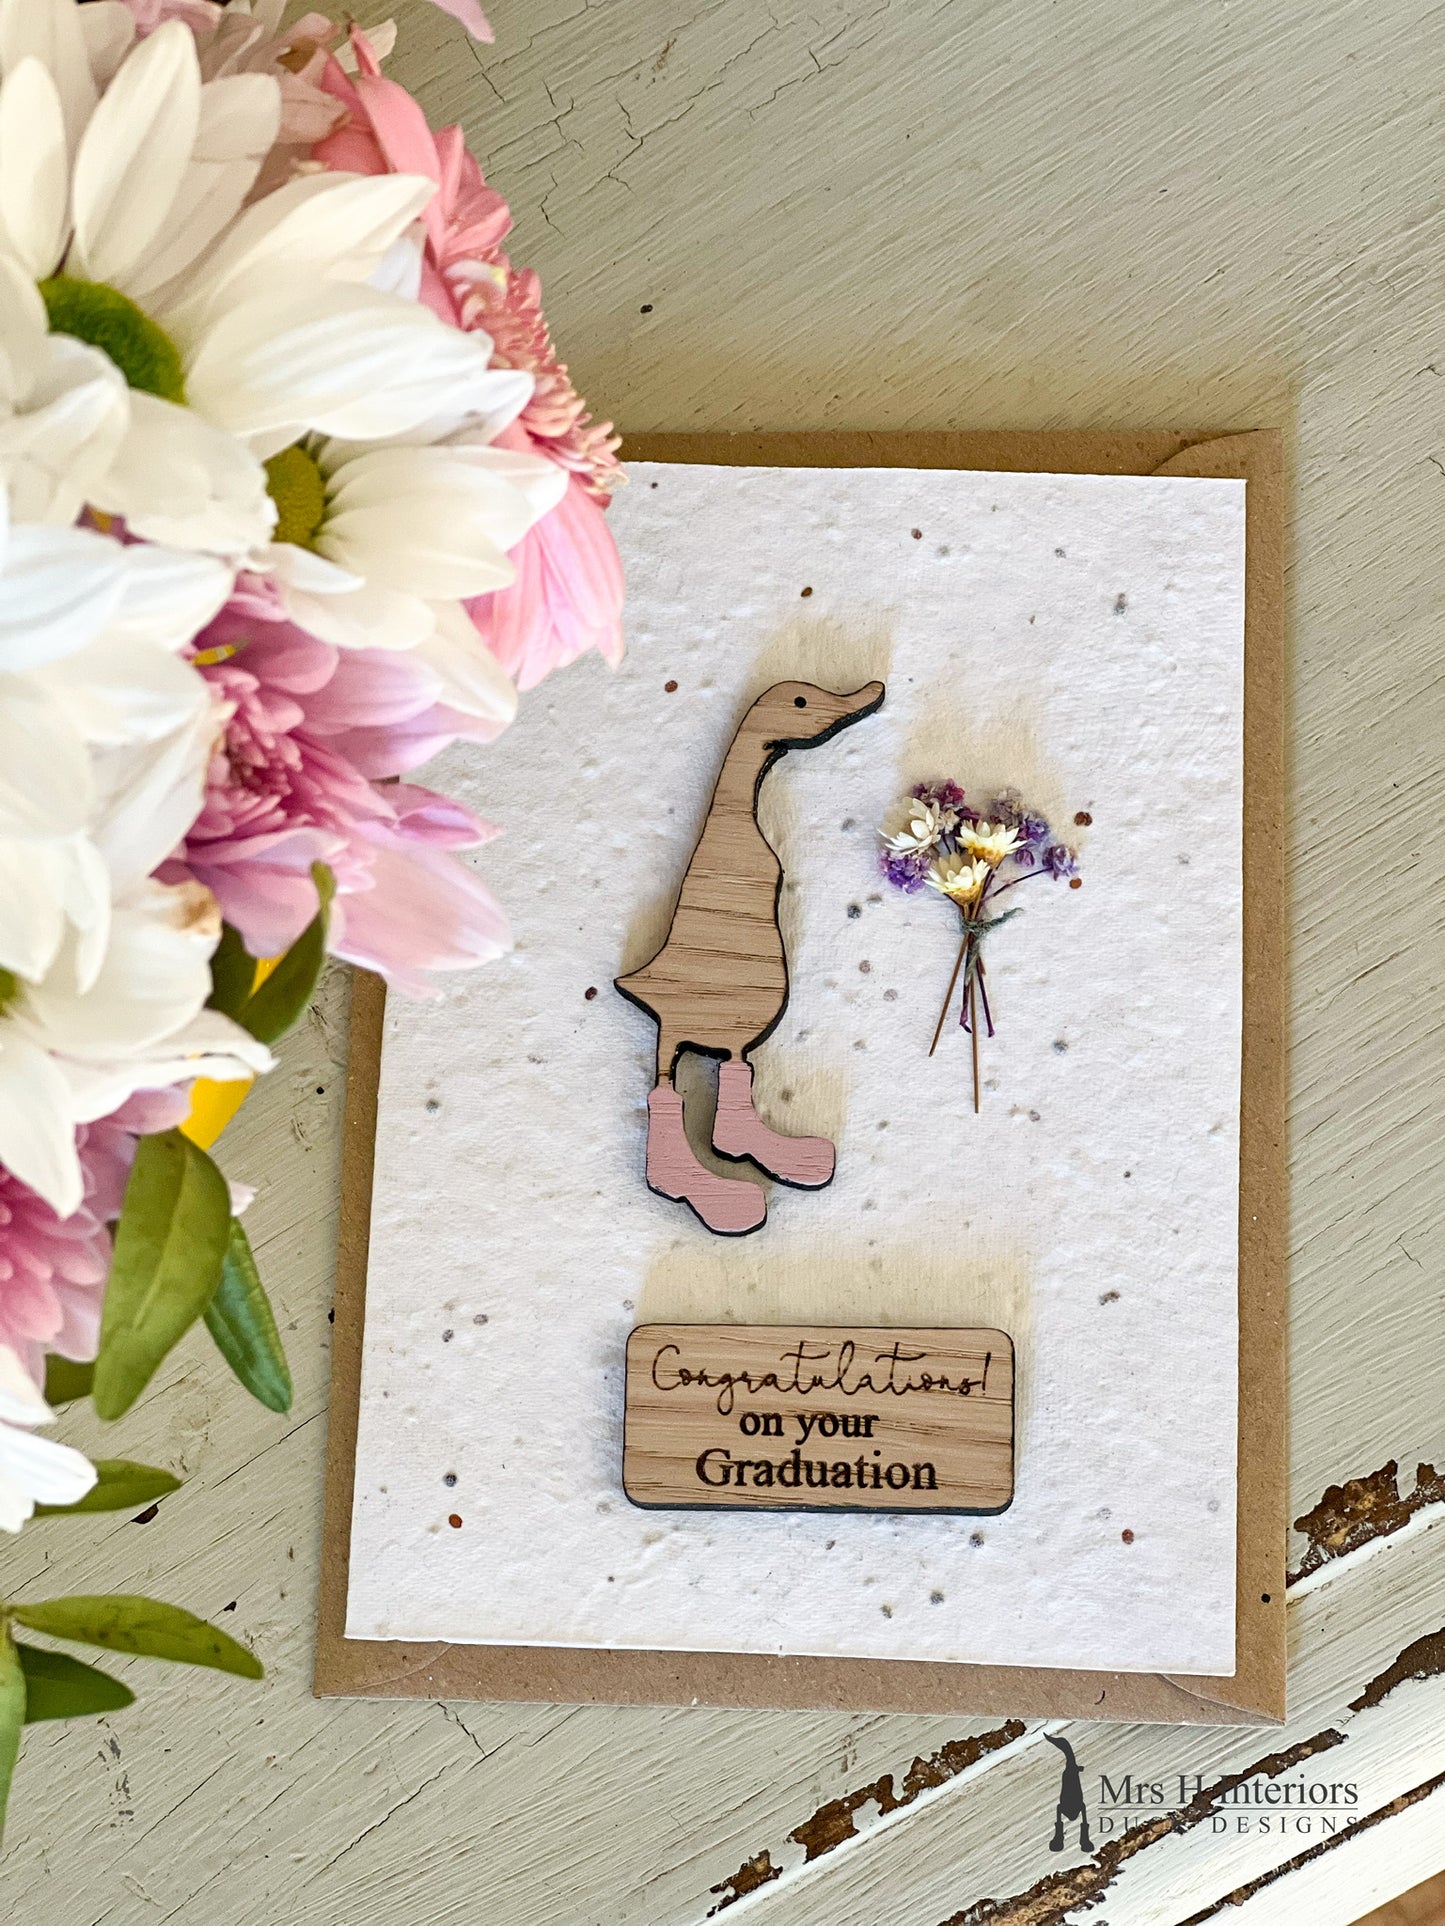 Congratulations on Your Graduation Card - Duck with Flowers - Decorated Wooden Duck in Boots by Mrs H the Duck Lady